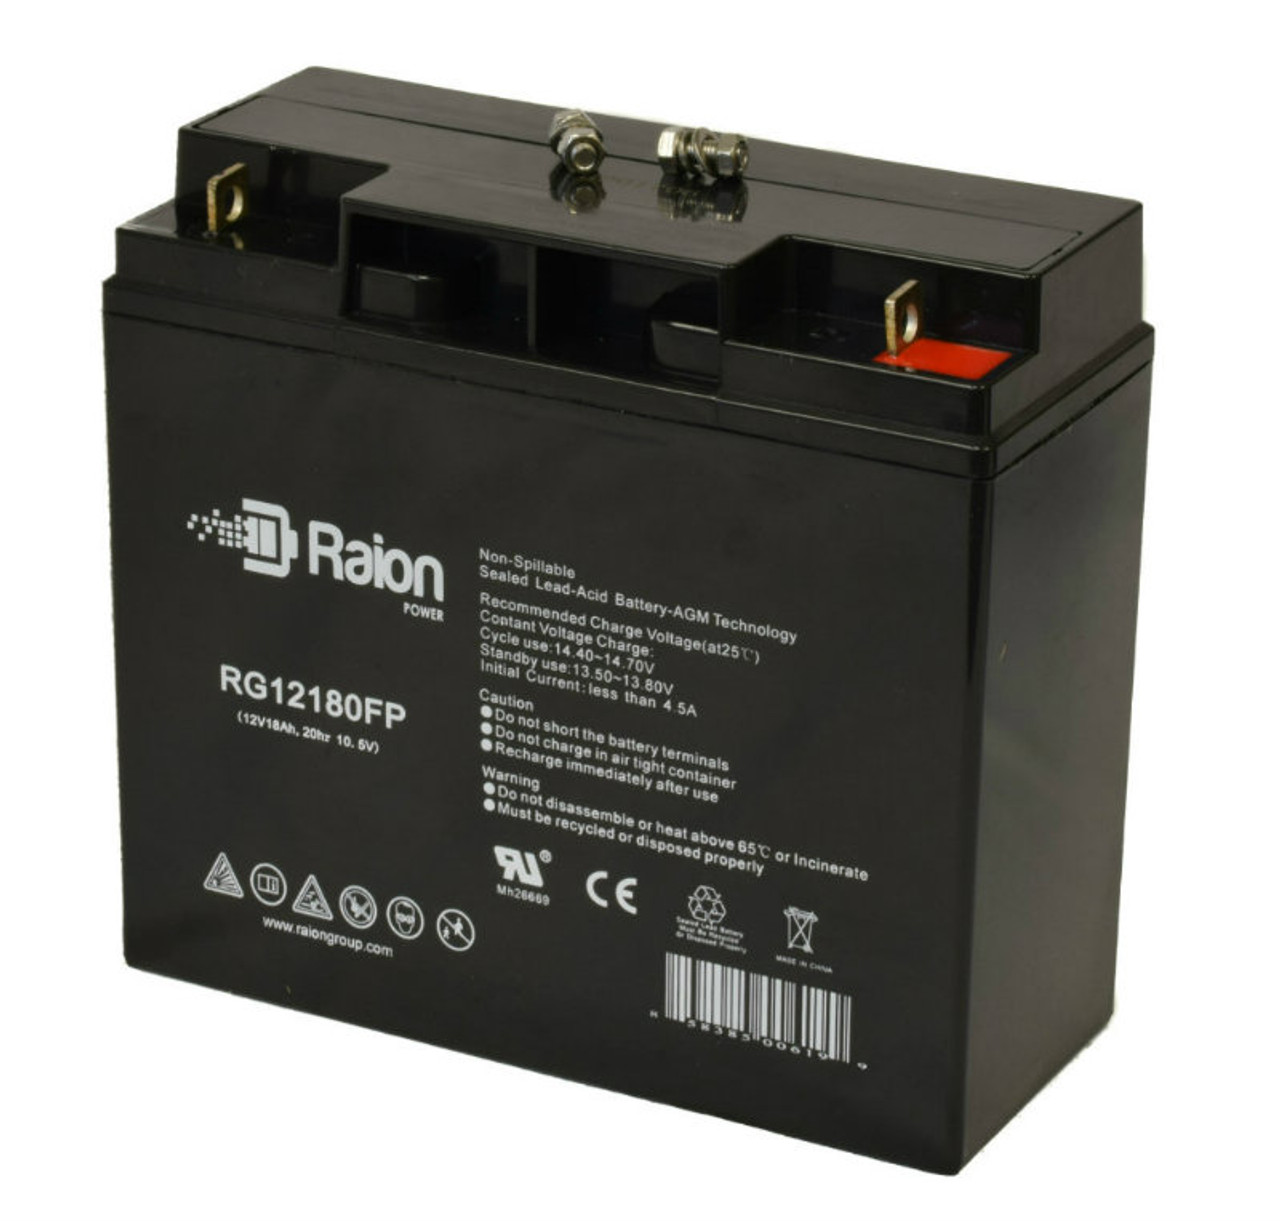 Raion Power Replacement 12V 18Ah Battery for Zonne Energy FP12180L - 1 Pack